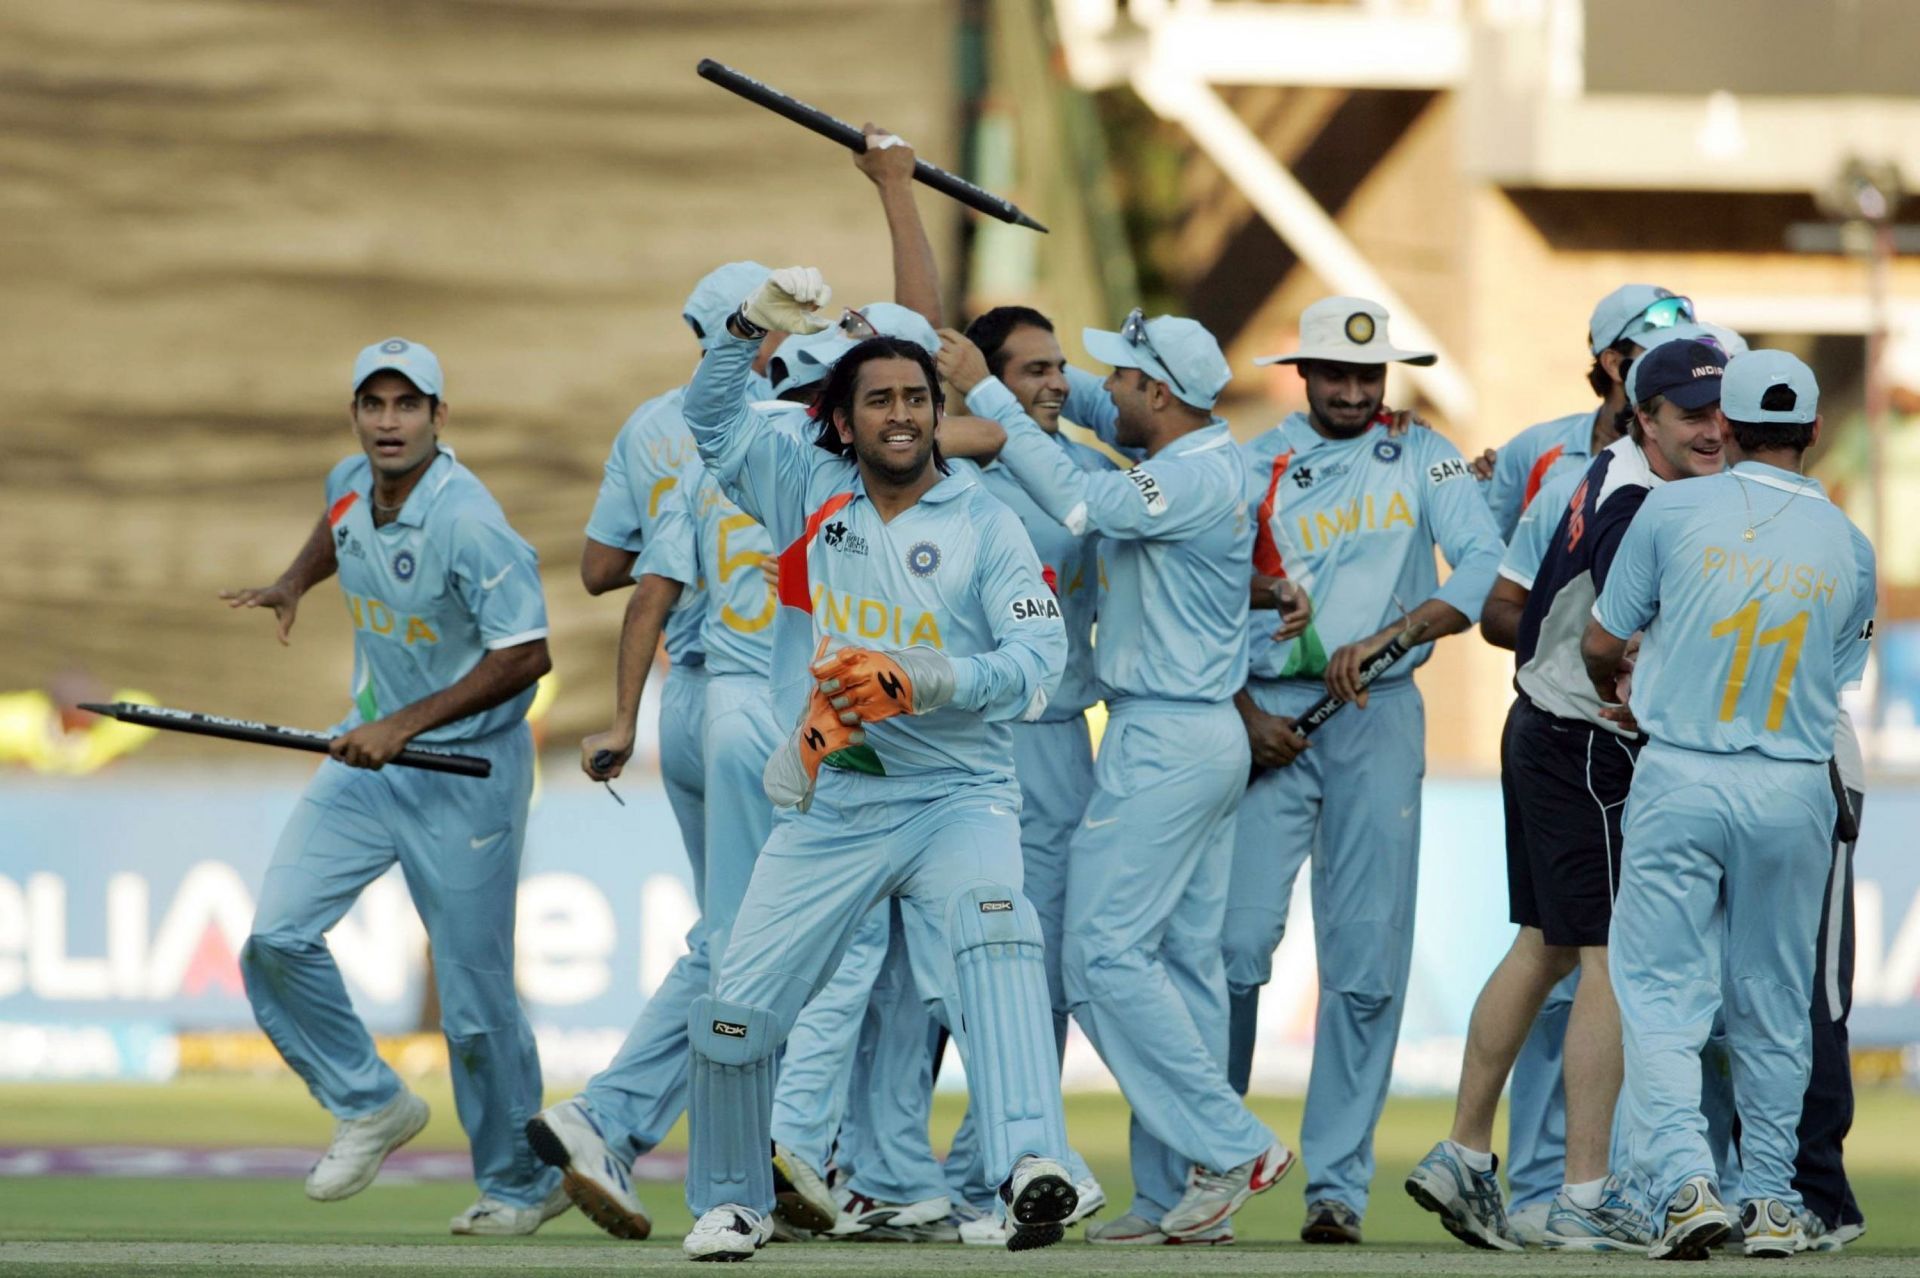 India won the inaugural edition of the competition in 2007. (Image Credit: Getty Images)